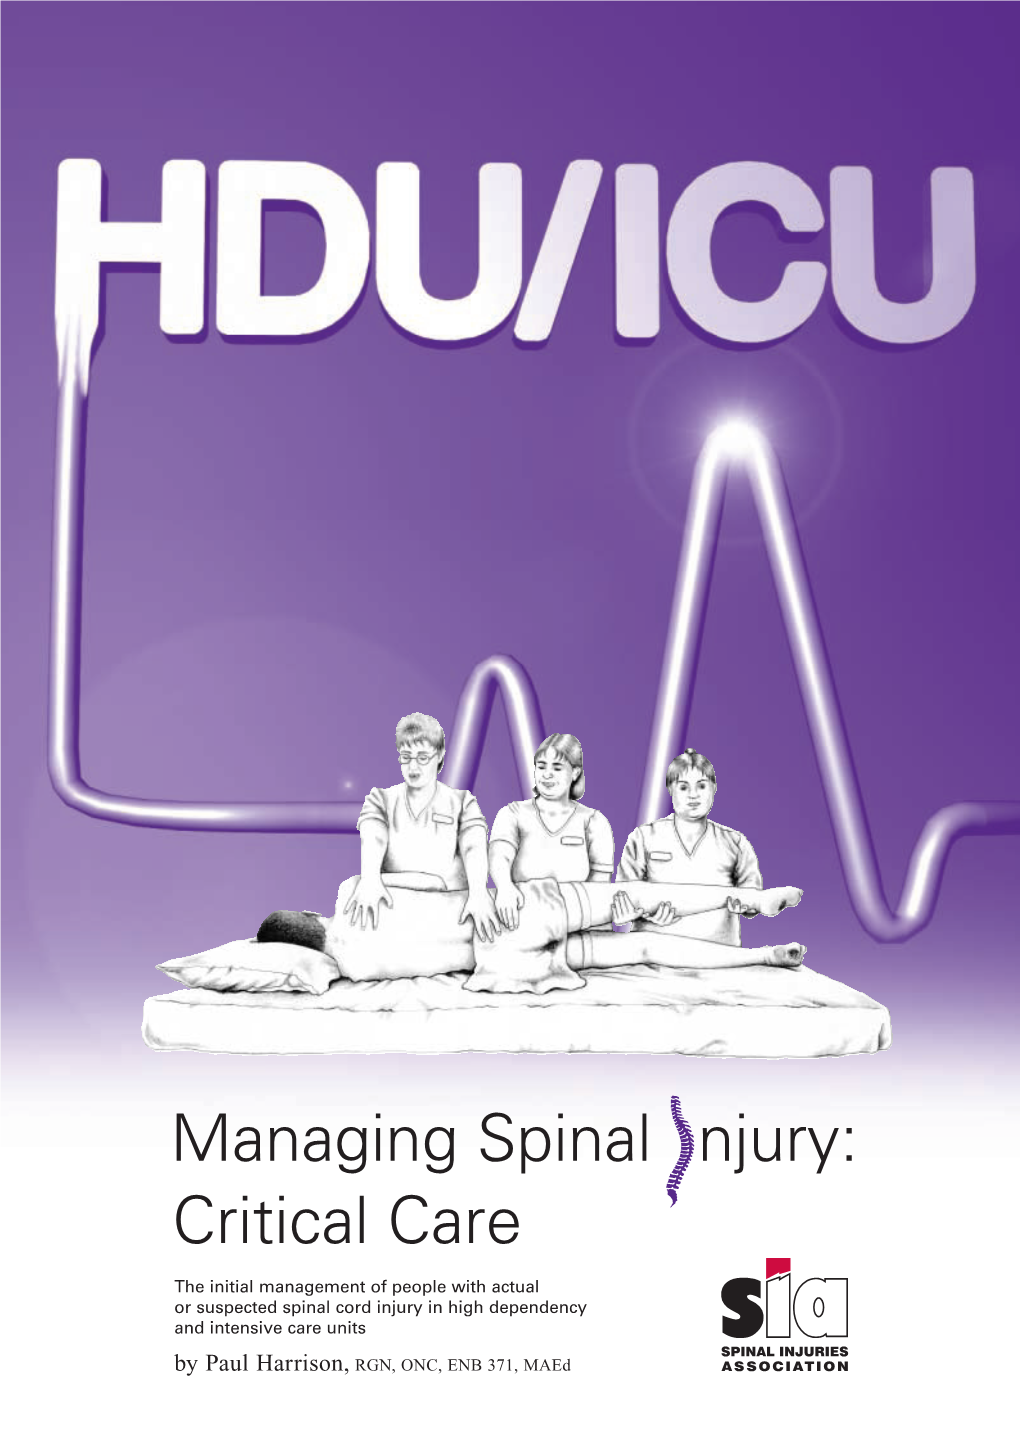 Managing Spinal Injuries in Critical Care (SIA)